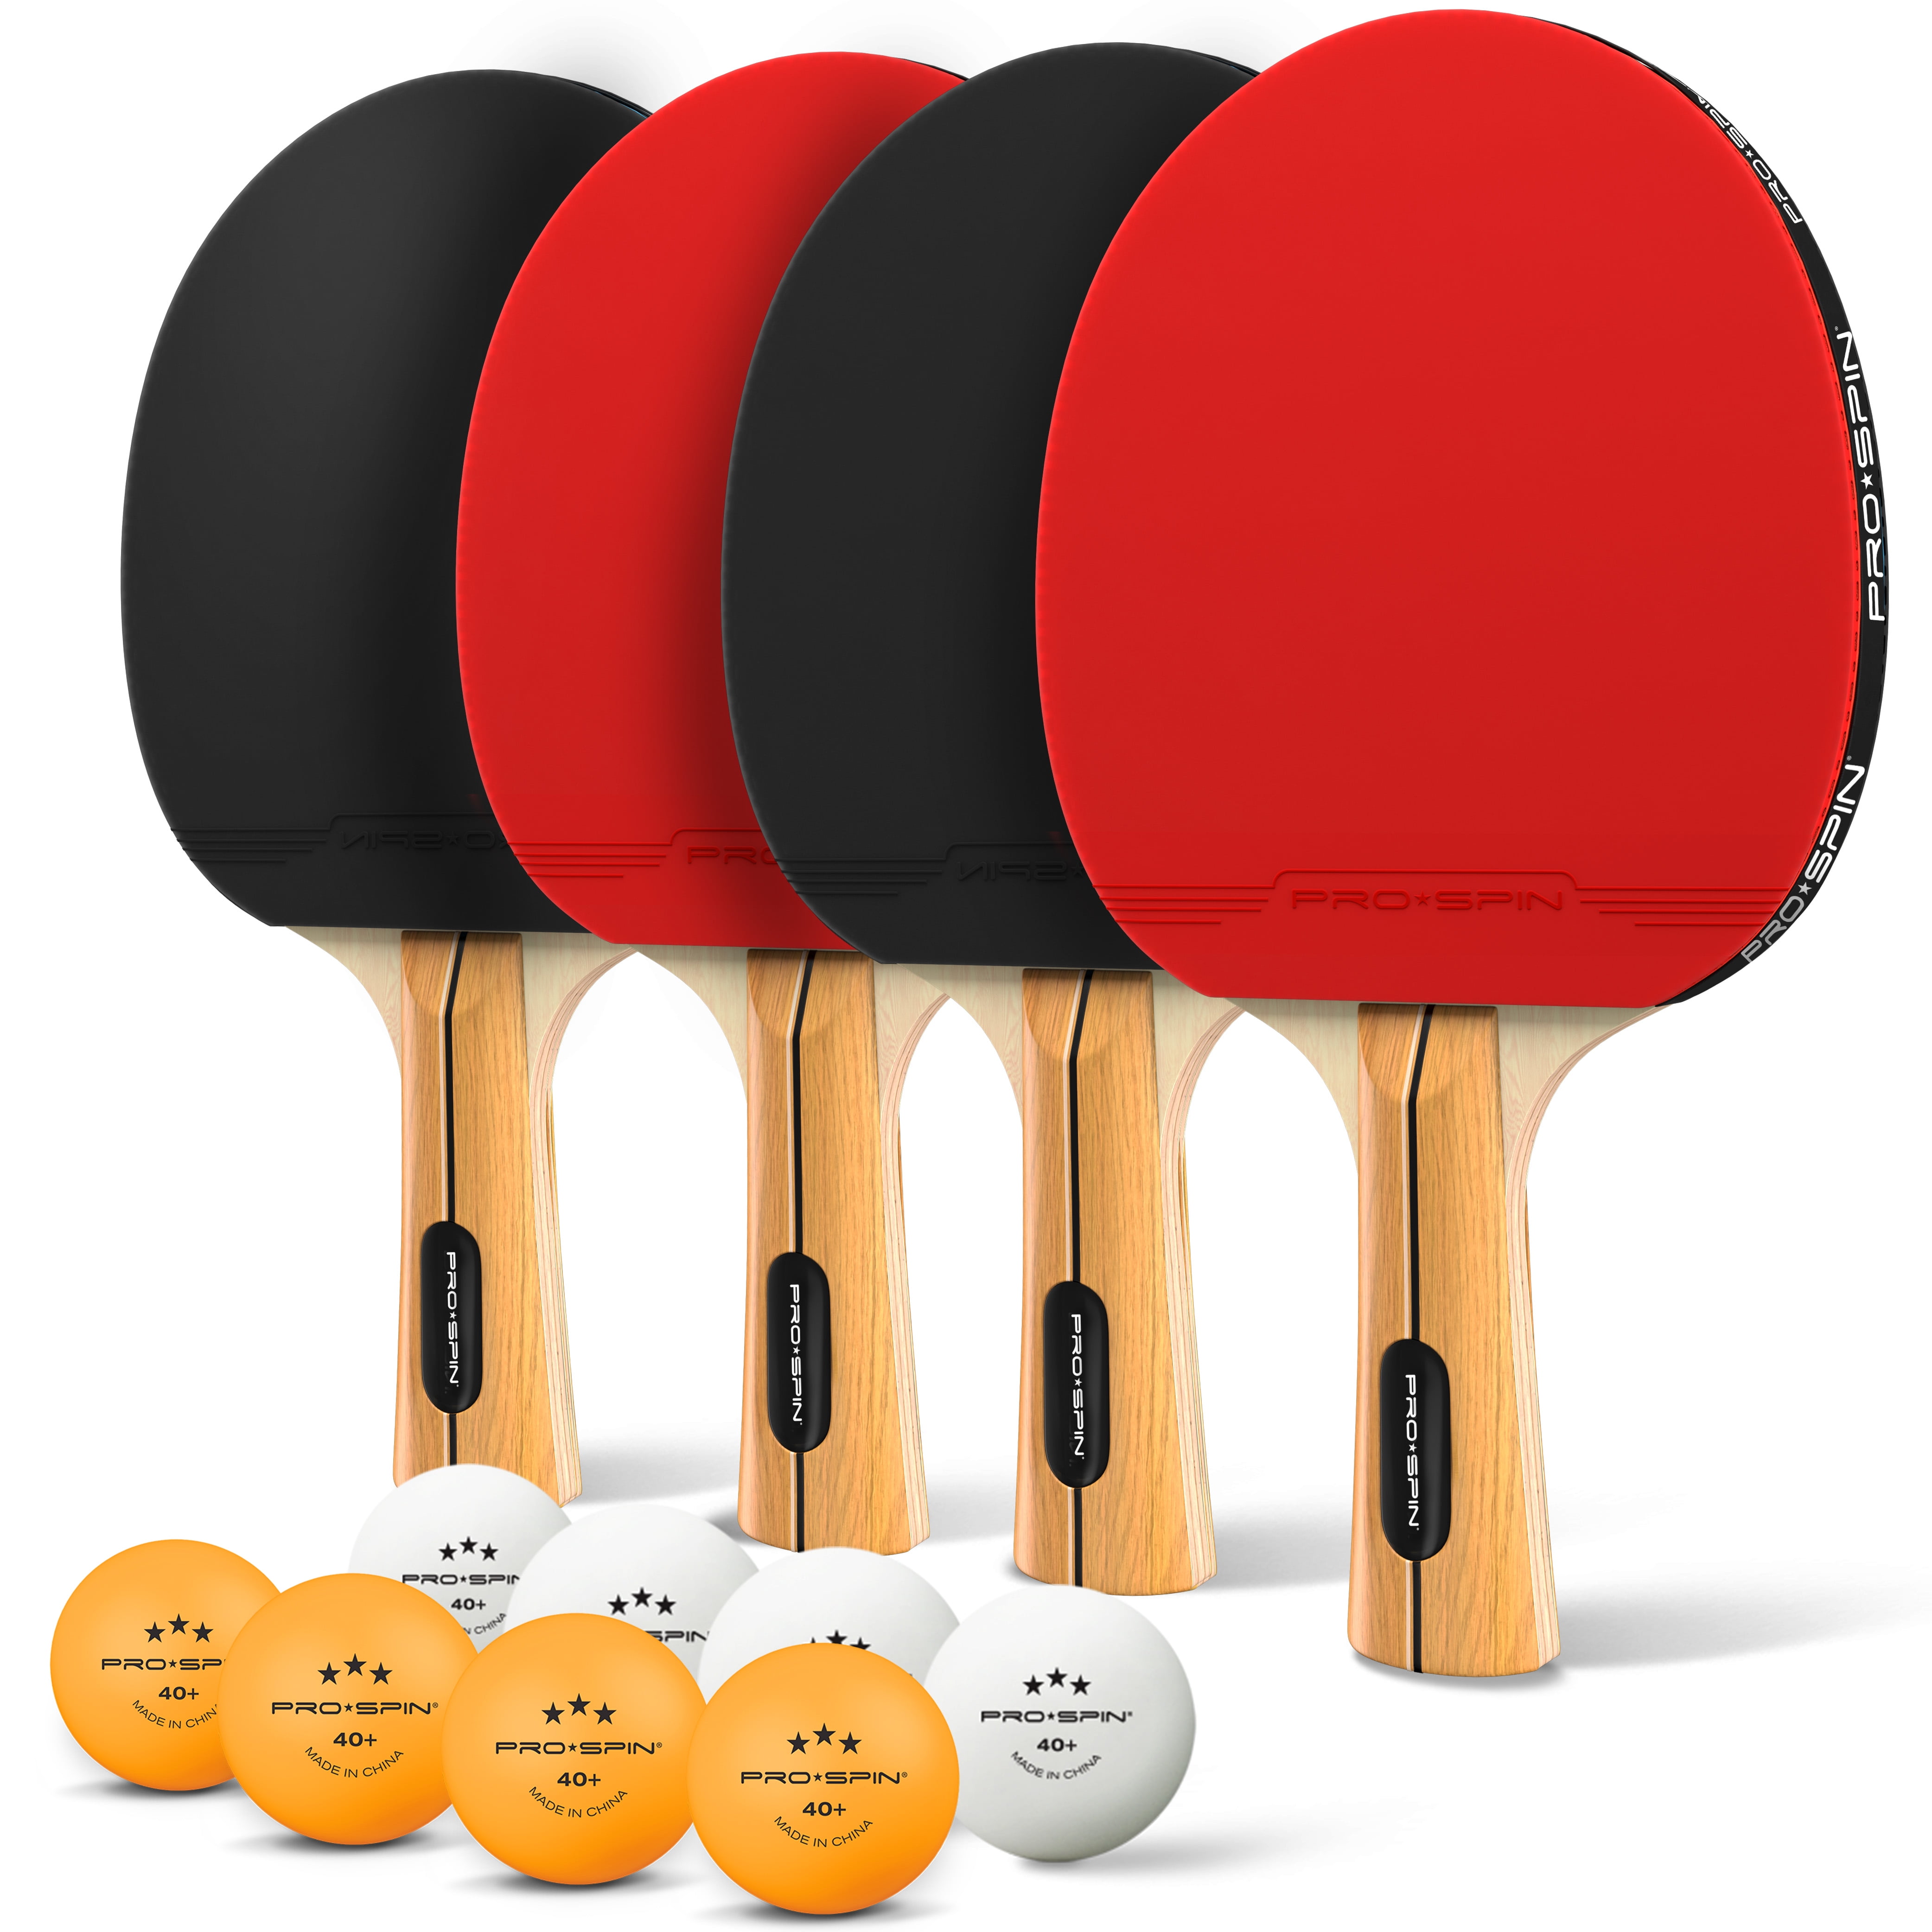 Ping Pong Balls 40mm Beer Pong Entertainment Table Tennis Game and Advertising 